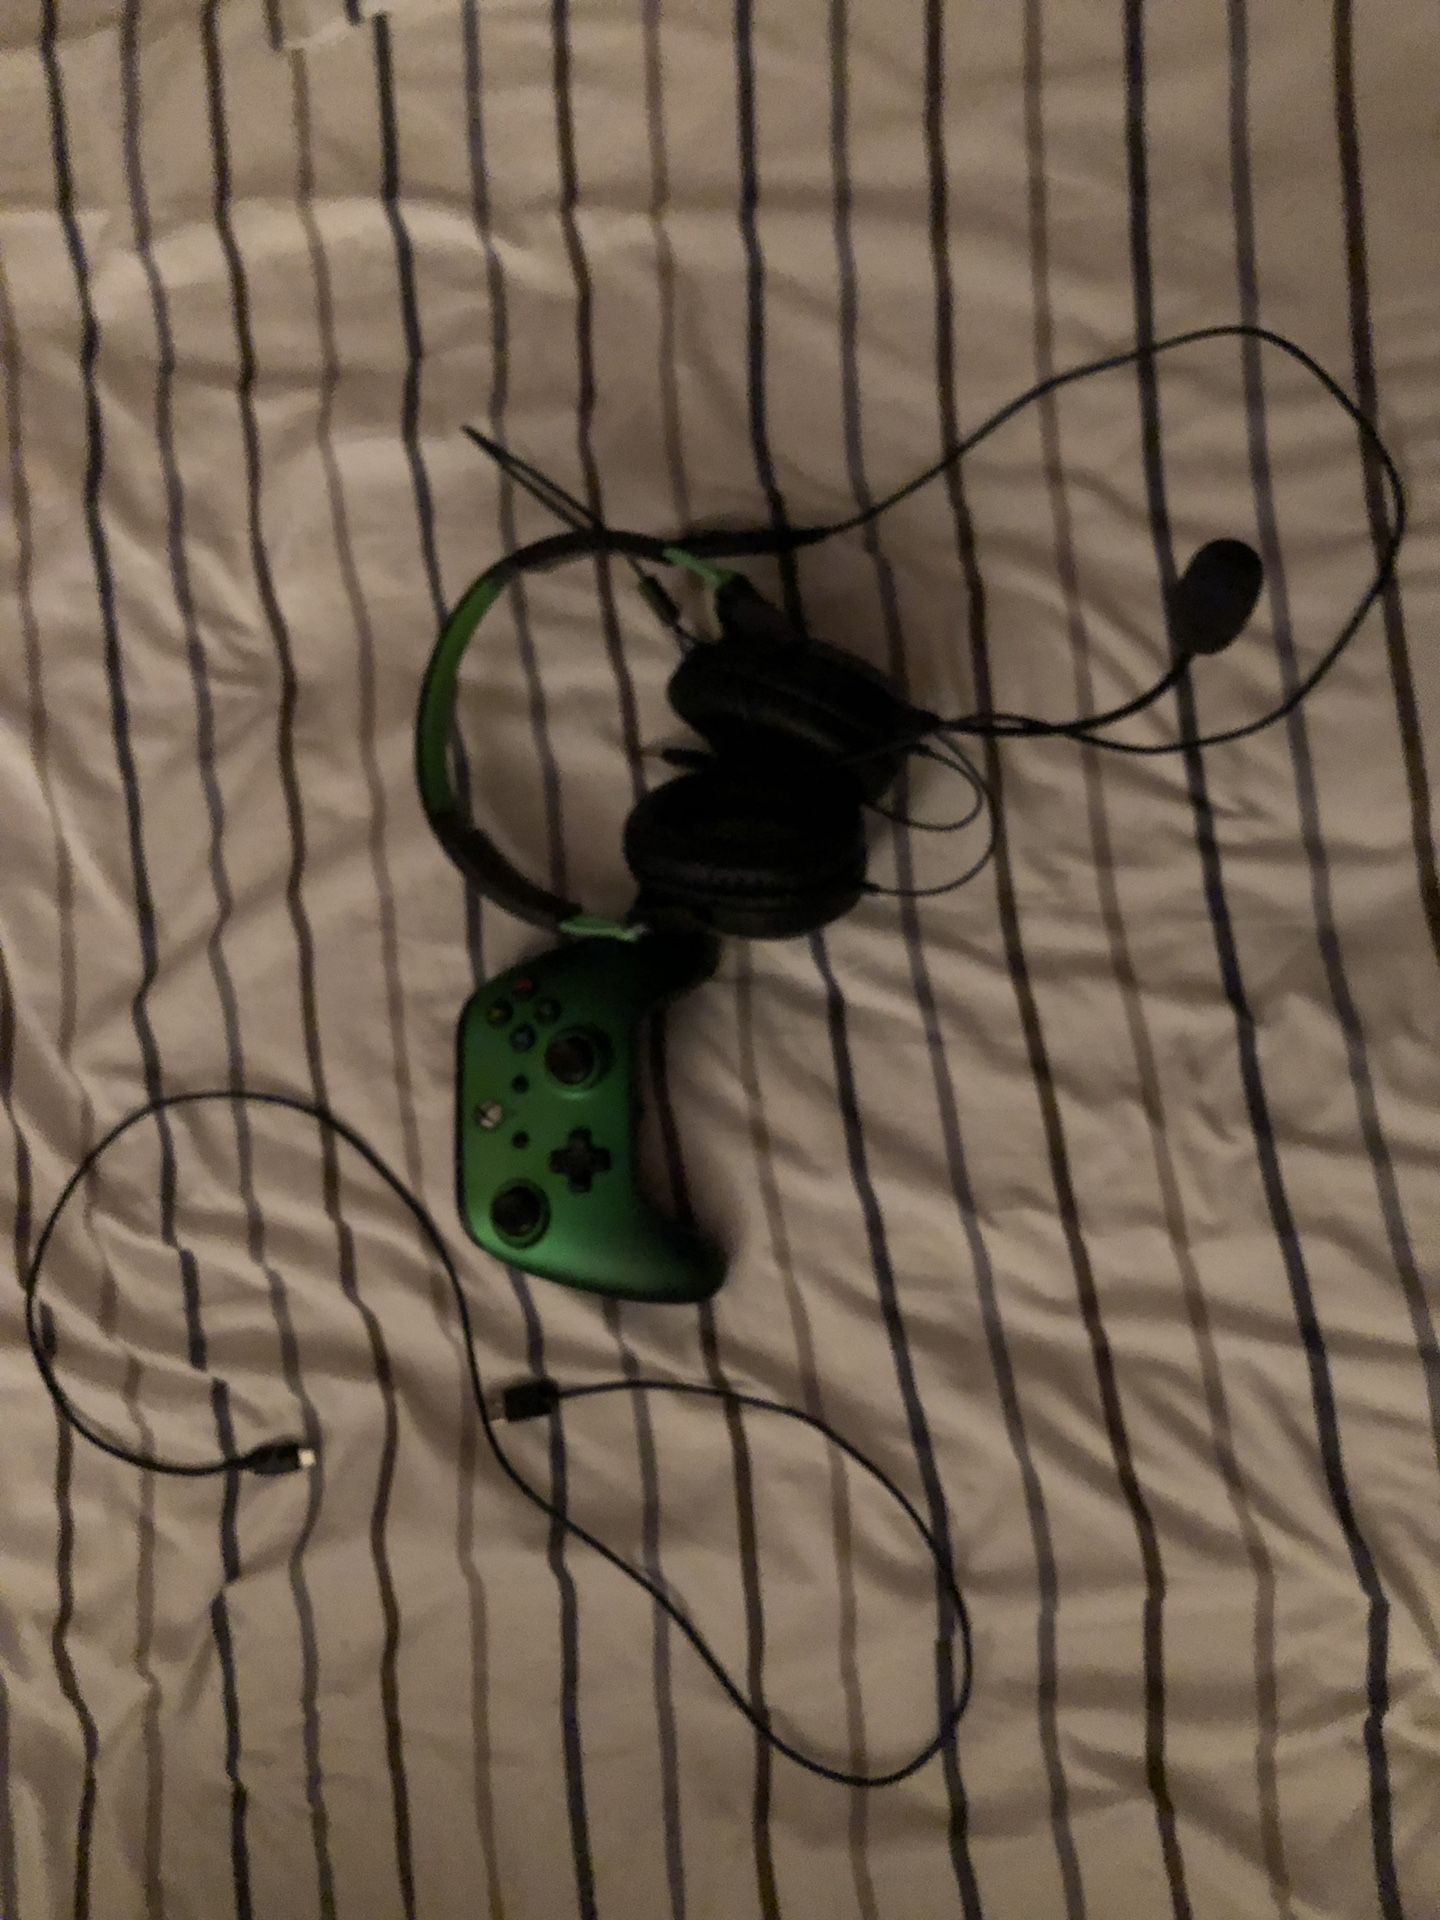 Xbox wired controller and turtle beach headset